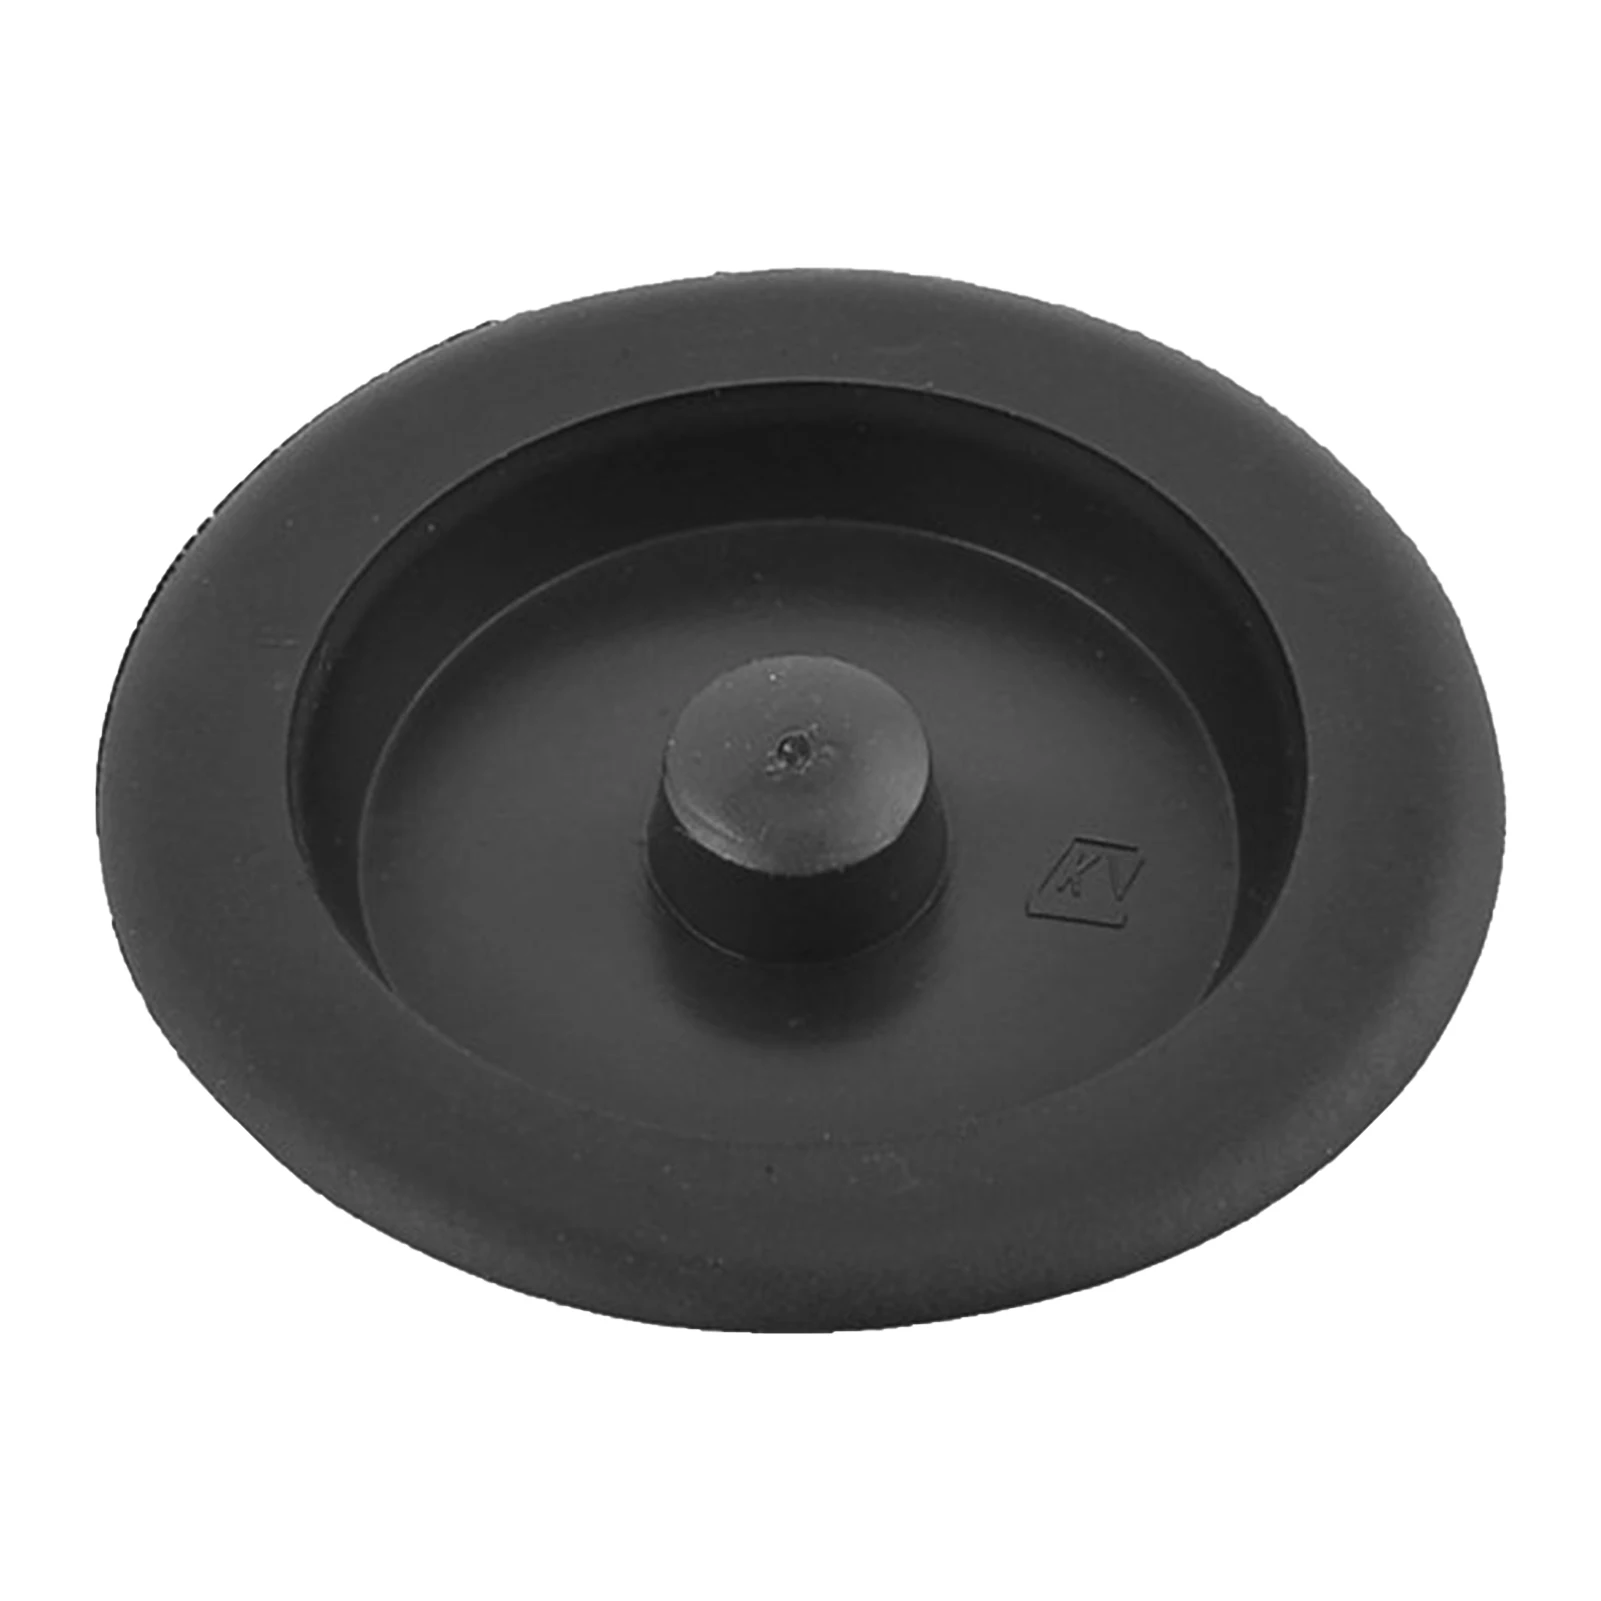 

Round Black Laundry Room Kitchen Drain Home Office Universal Plug Replacement Garbage Disposal Sink Stopper Accessories Rubber